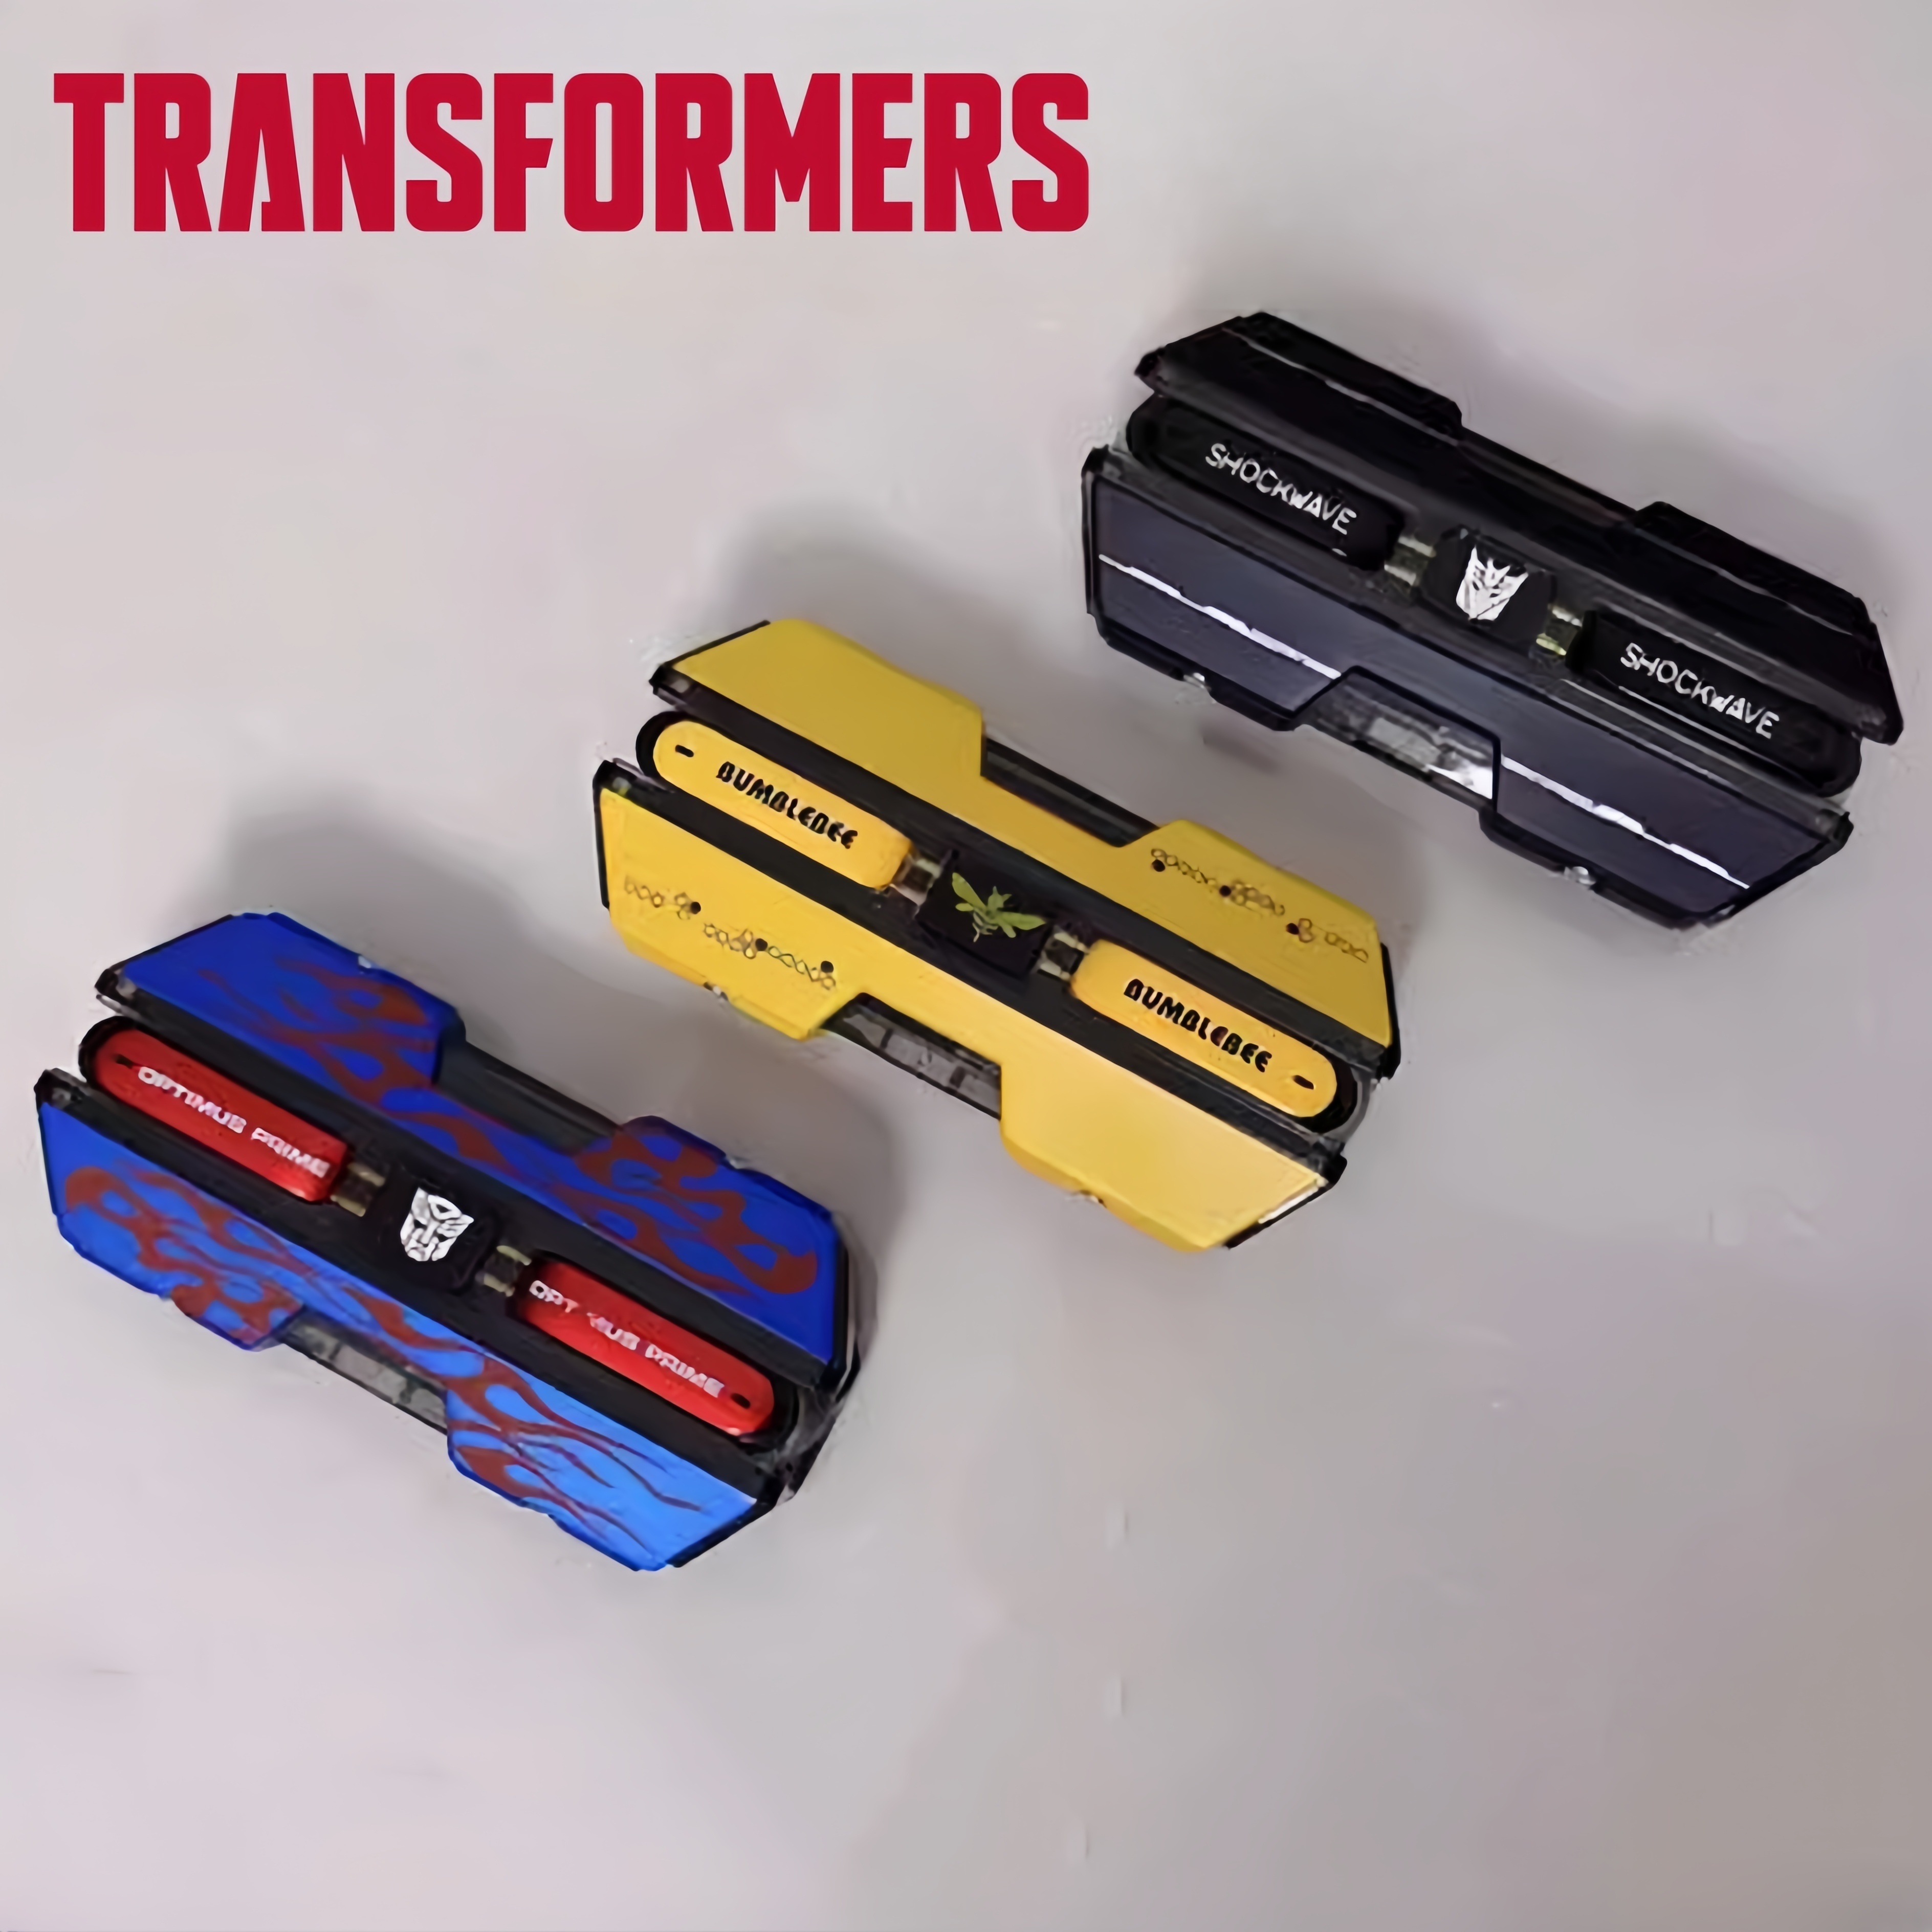 

Transformers In-ear Wireless Earphones: Superior Noise Cancellation, Ideal For Music, Gaming, And Extended Use